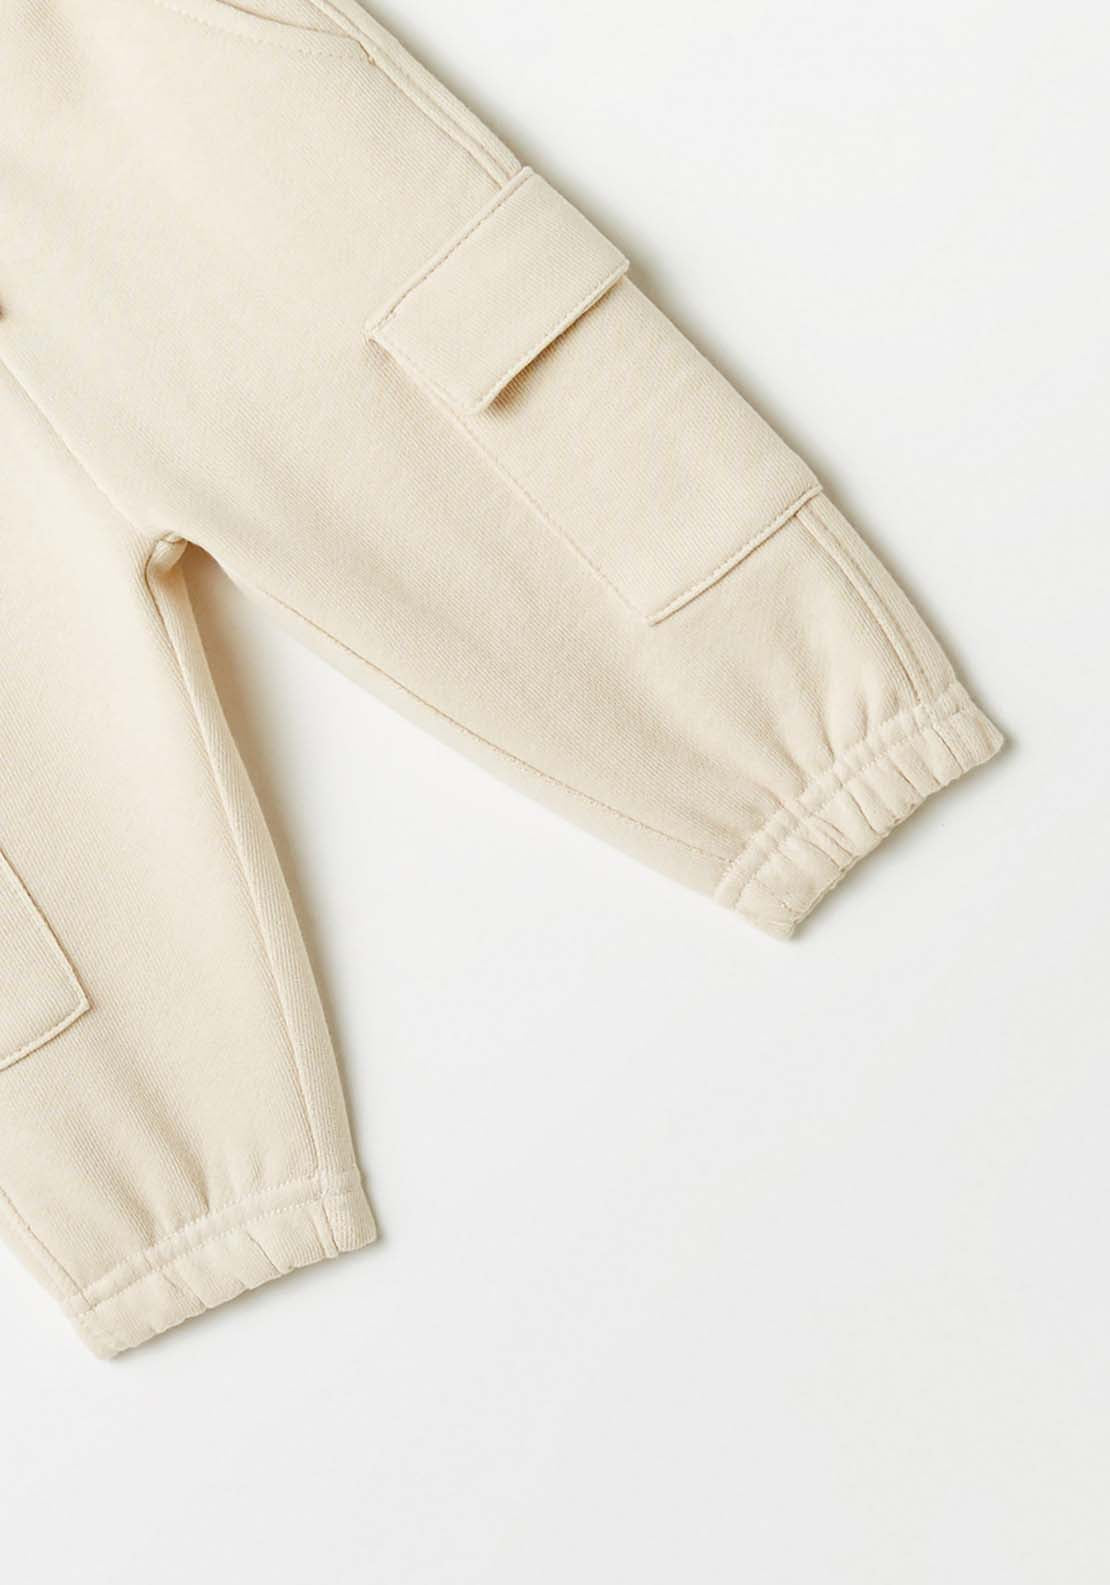 Sfera Cuffed Cargo Pants - White 5 Shaws Department Stores